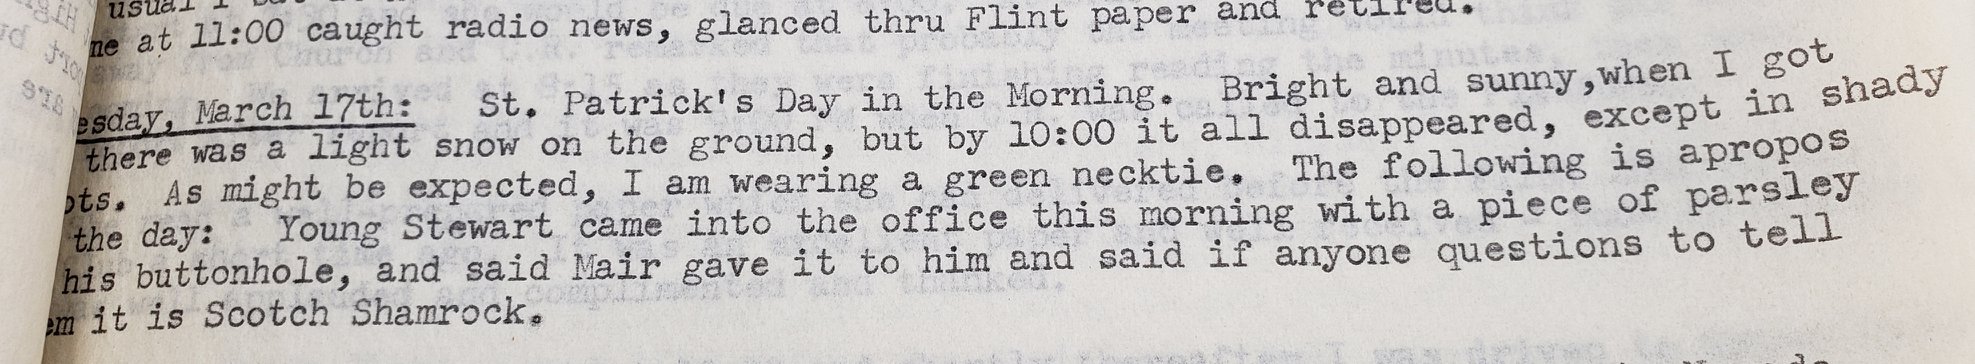 An image of a typewritten excerpt from C.S. Mott's diary about St. Patrick's Day.